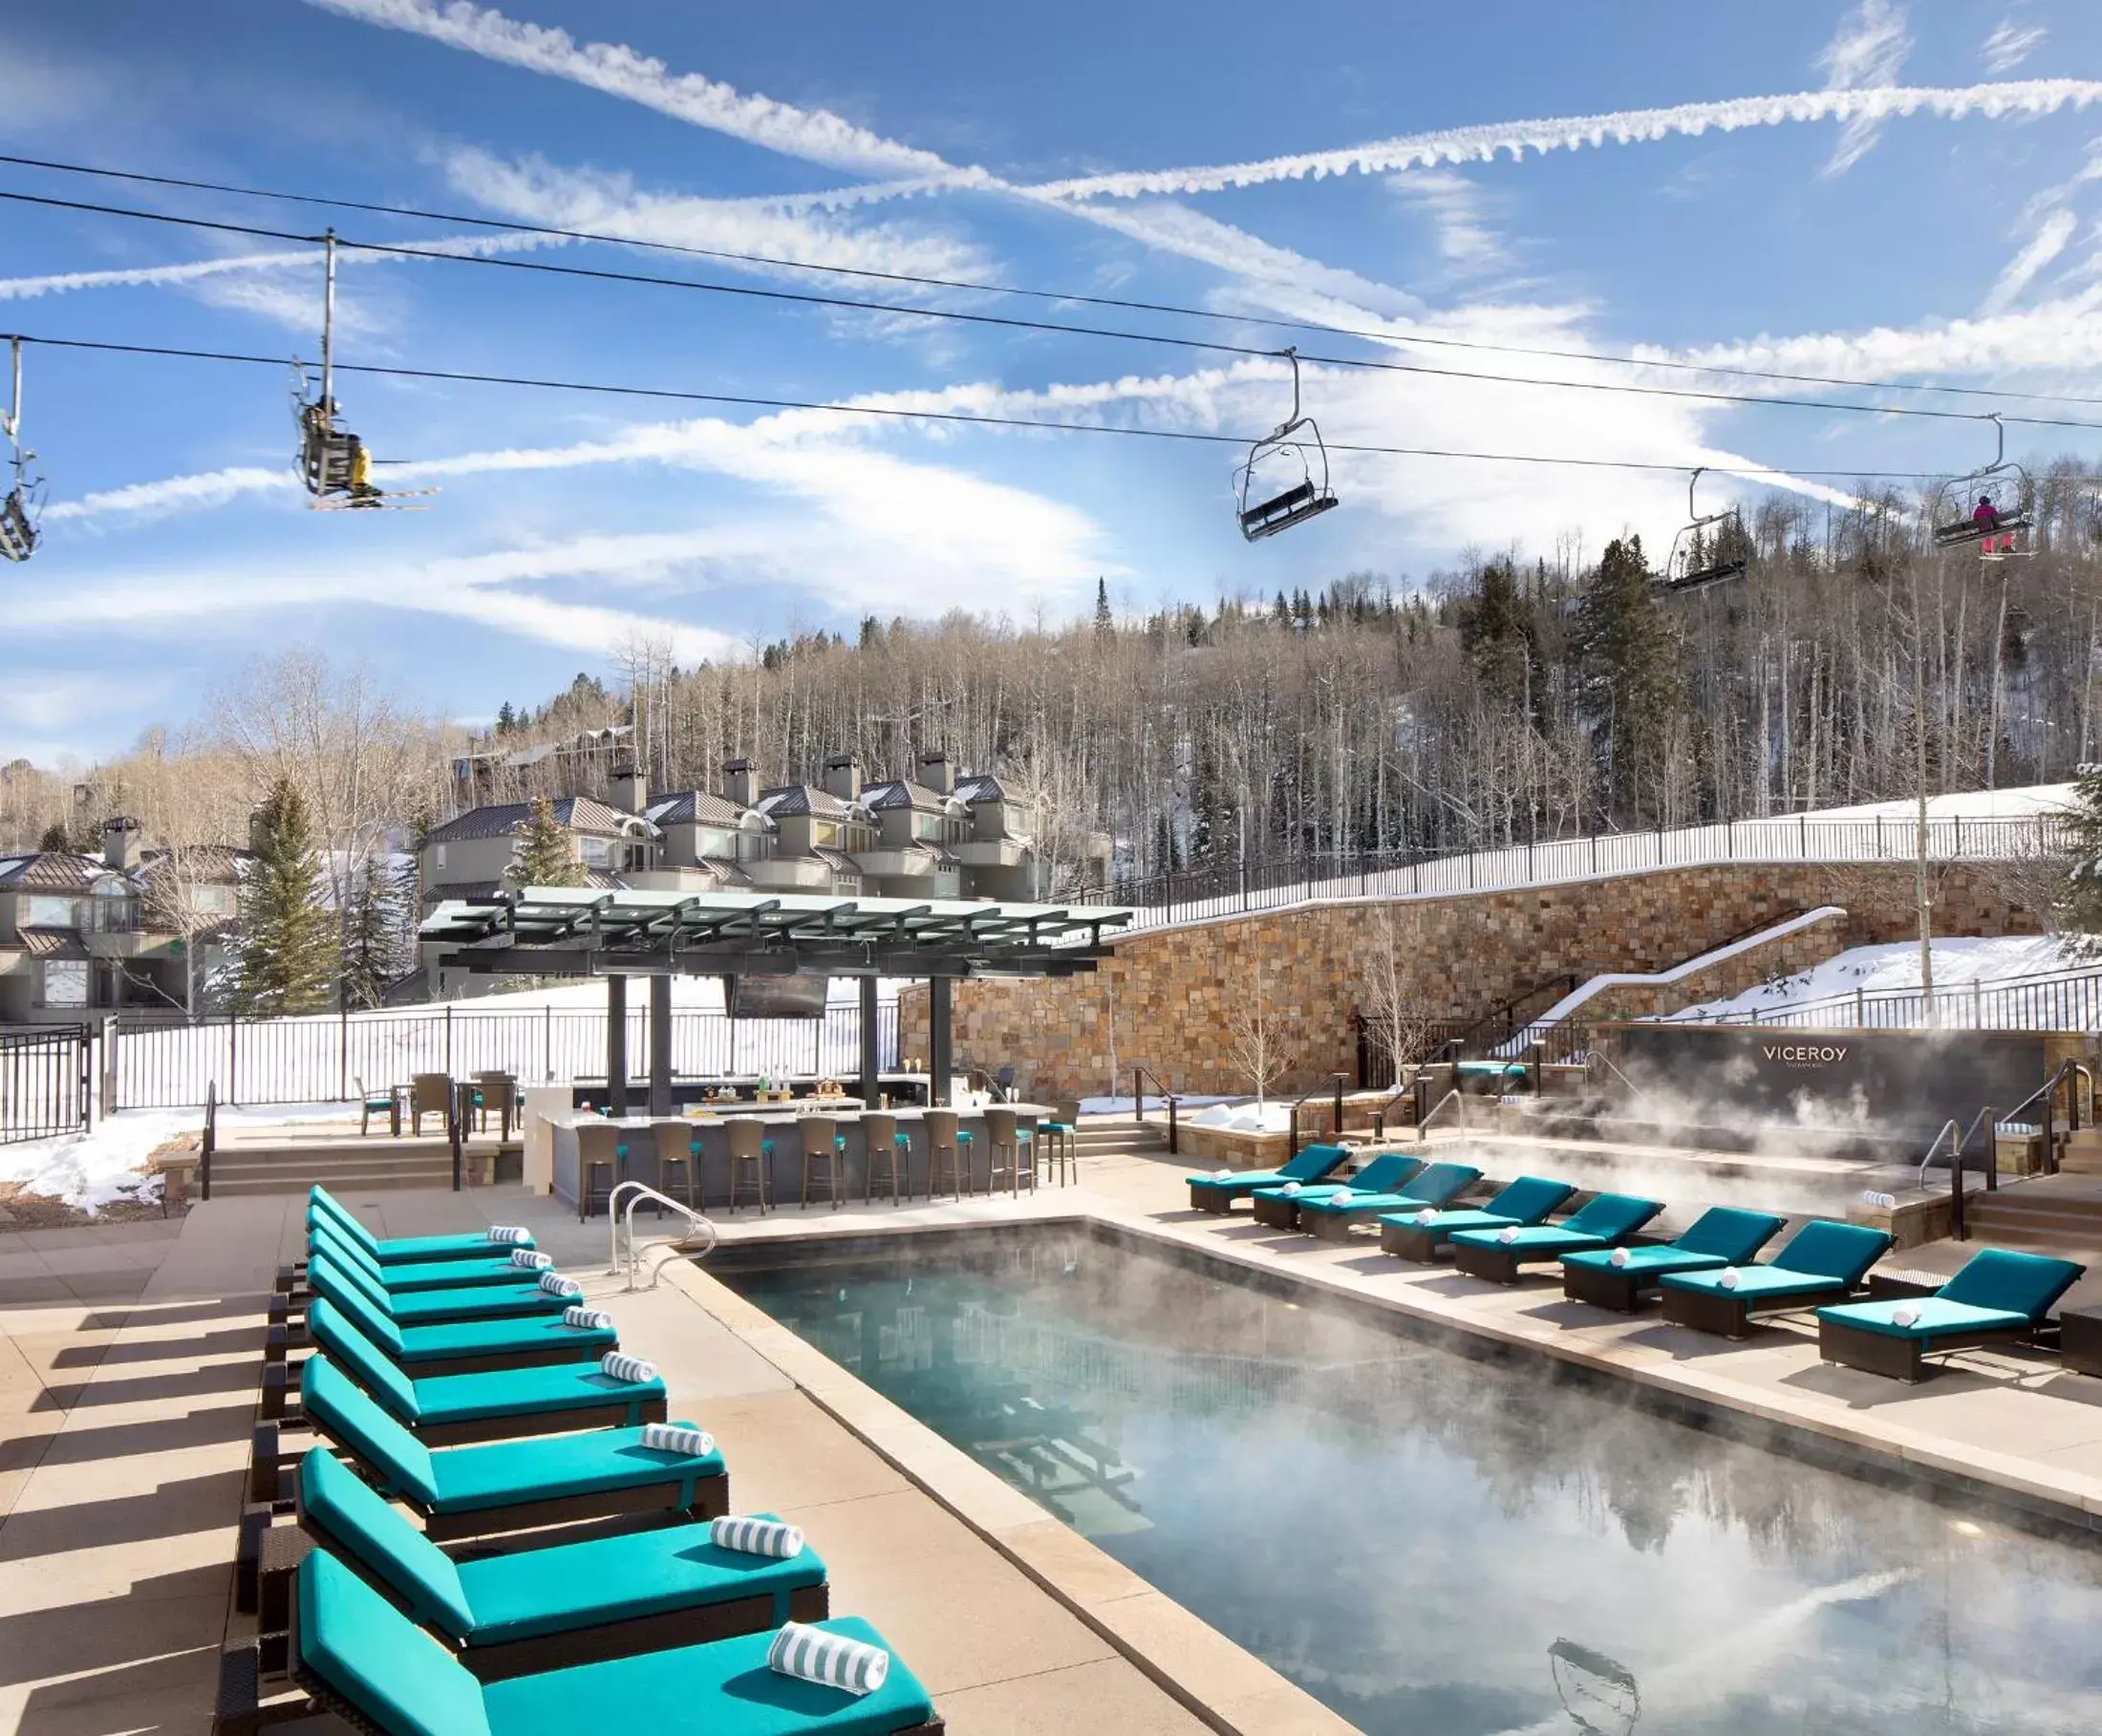 Patio, Swimming Pool in Viceroy Snowmass